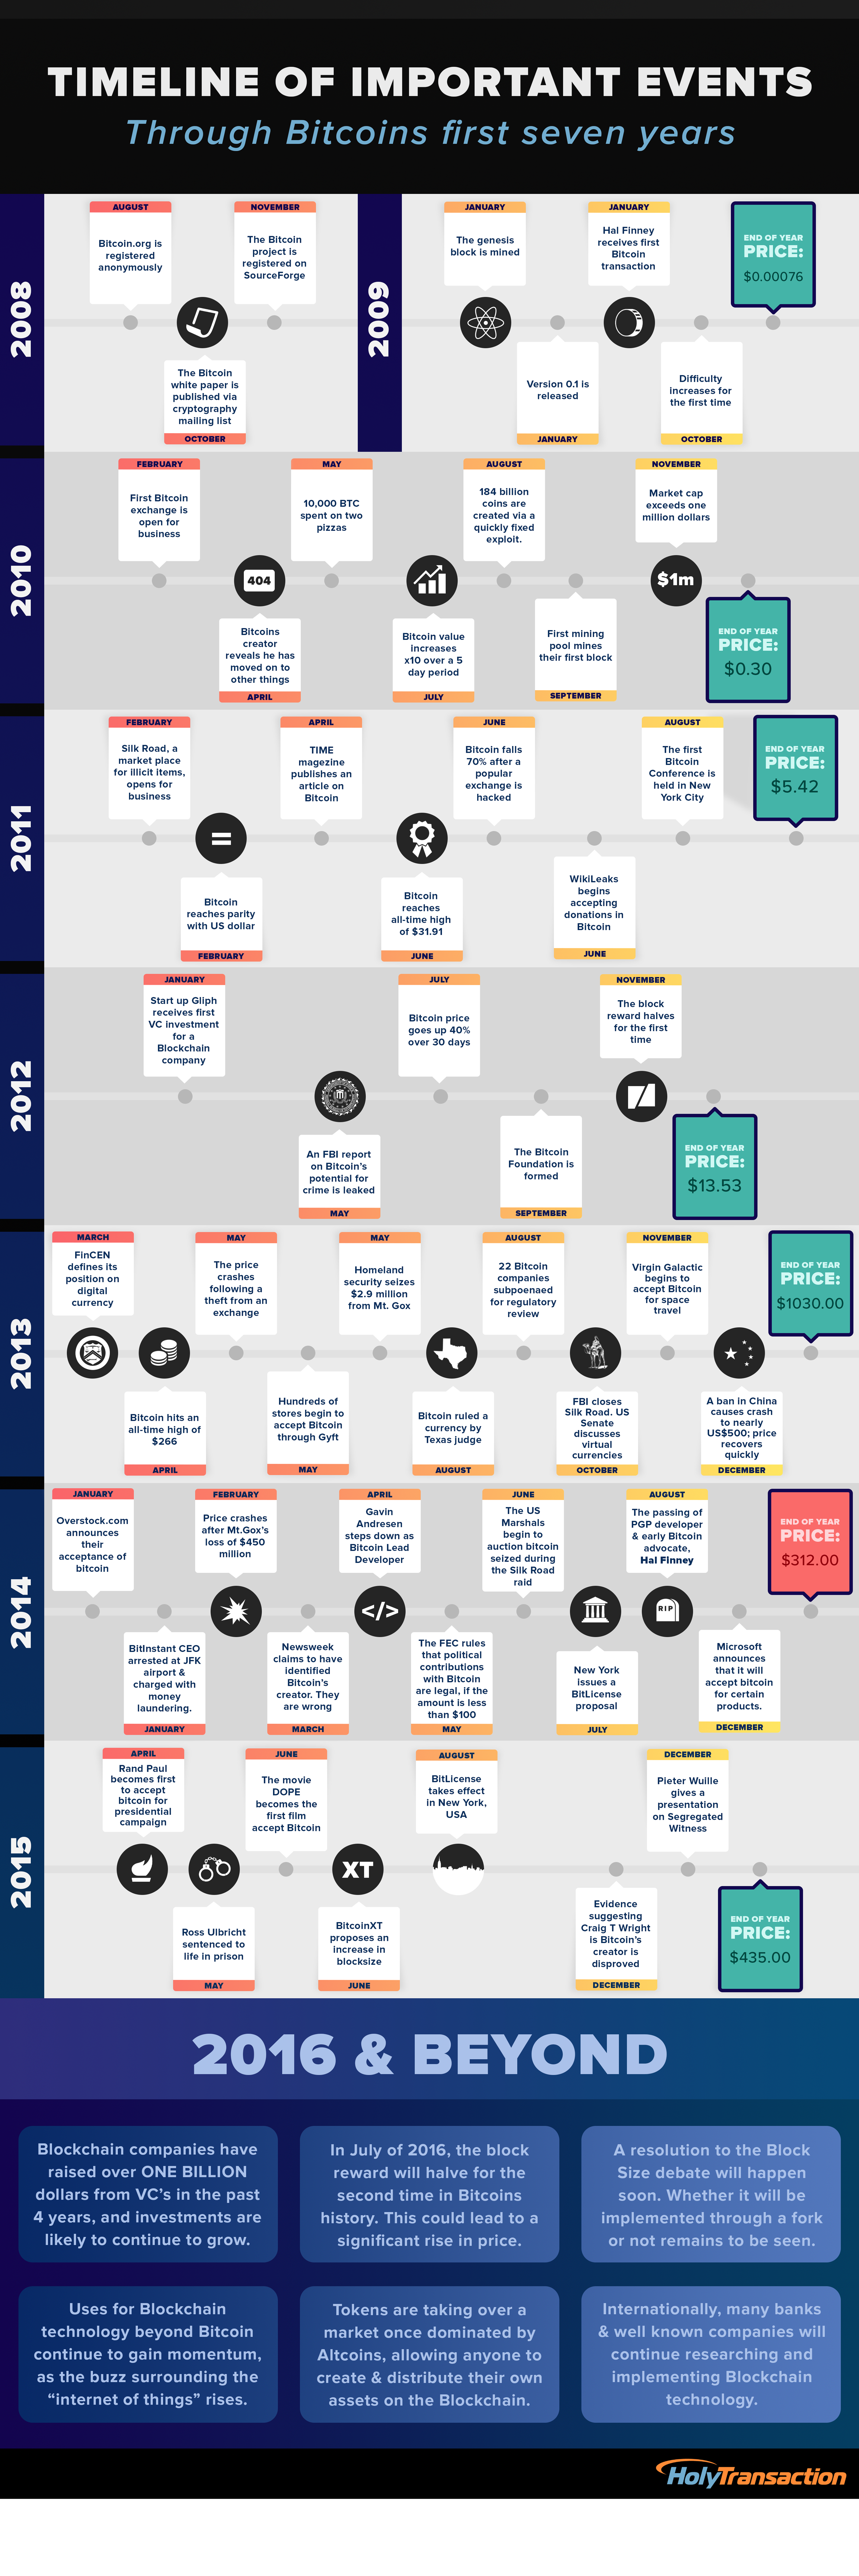 Timeline of important events for Bitcoin | Infographic